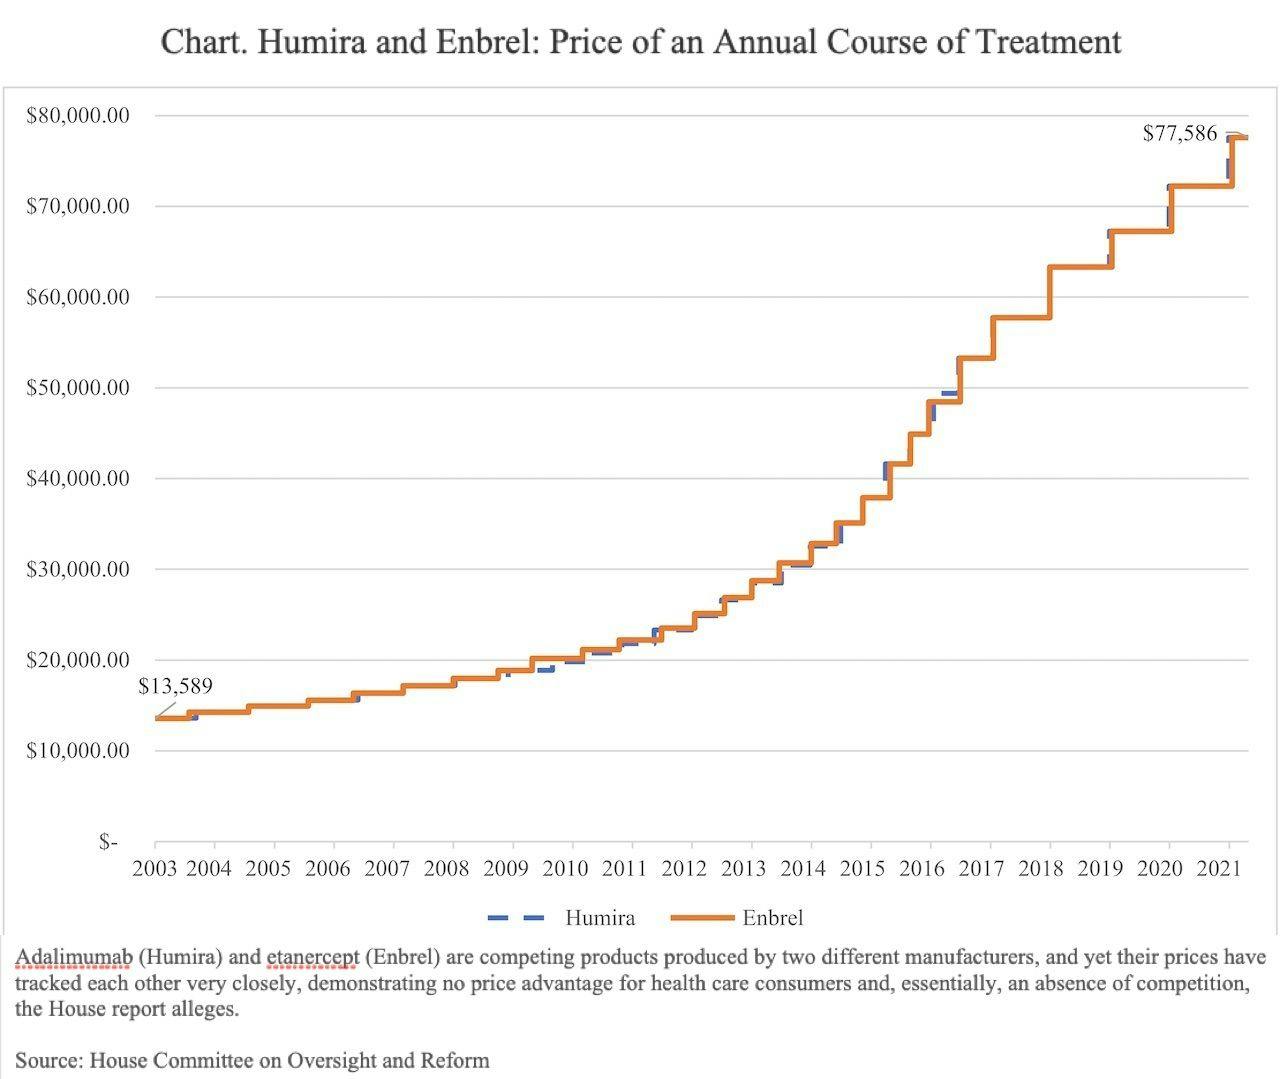 Chart. Humira and Enbrel: Price of an Annual Course of Treatment